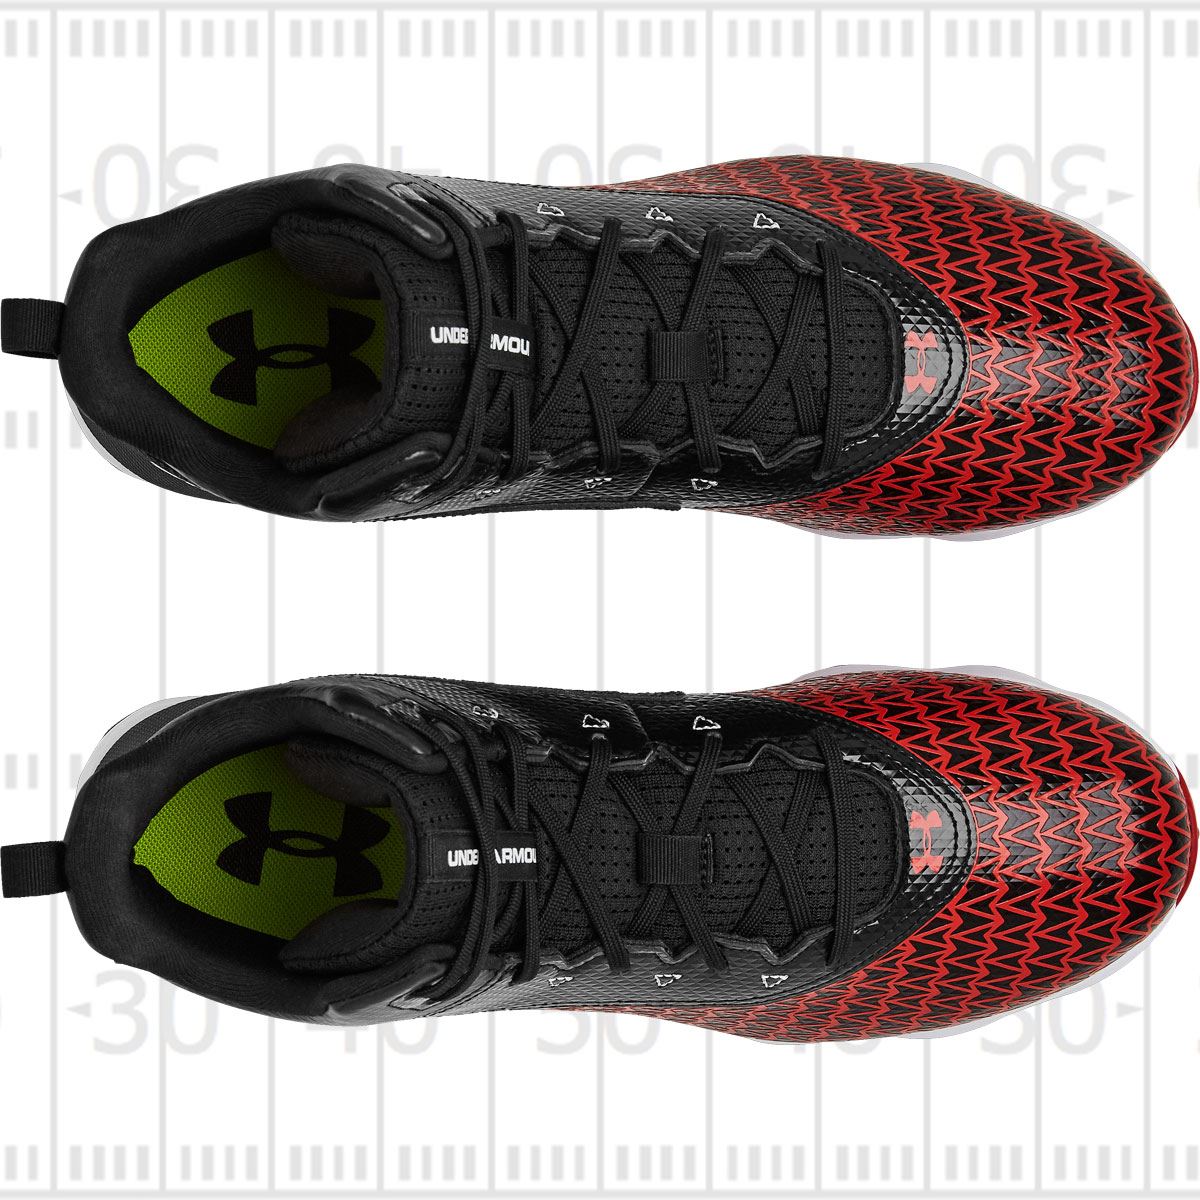 Under Armour Hammer Mid MC Football Cleats - Durable Synthetic Upper